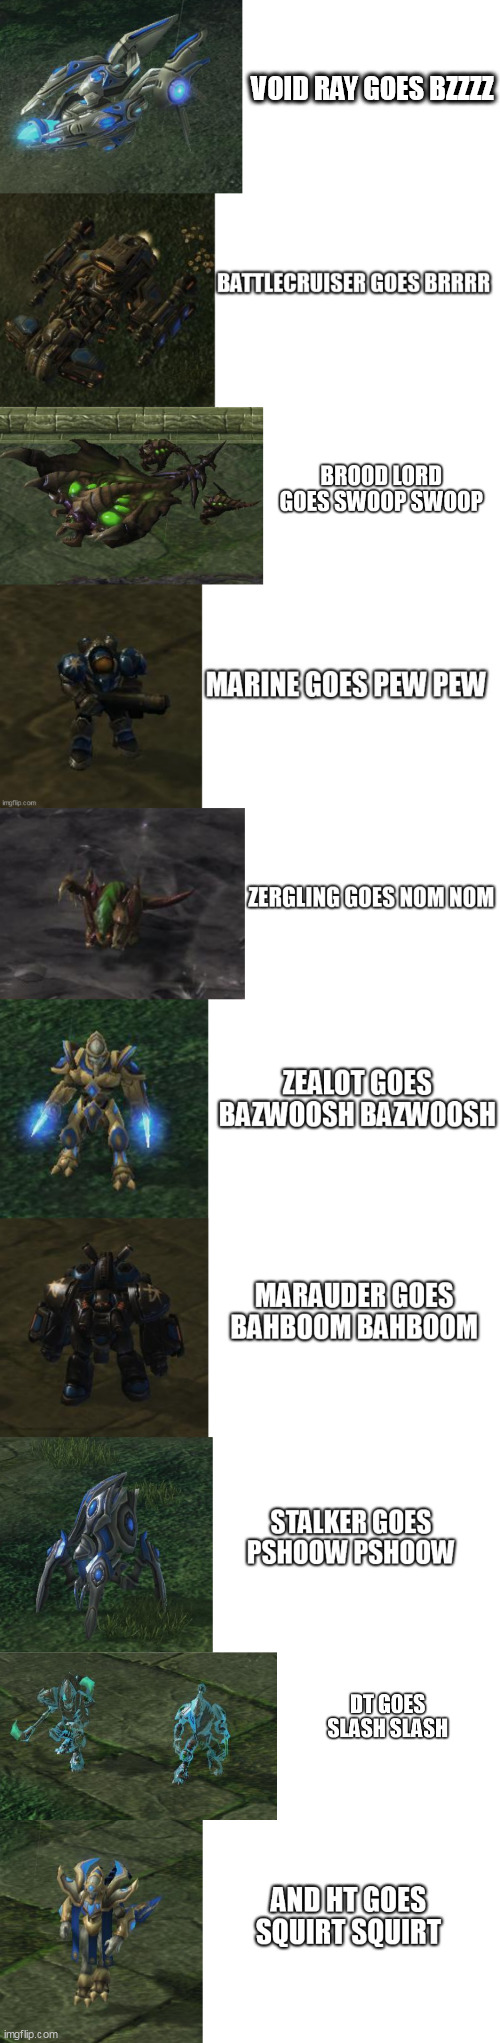 this meme took forever to make lmao | VOID RAY GOES BZZZZ | image tagged in blank white template,starcraft,long meme | made w/ Imgflip meme maker